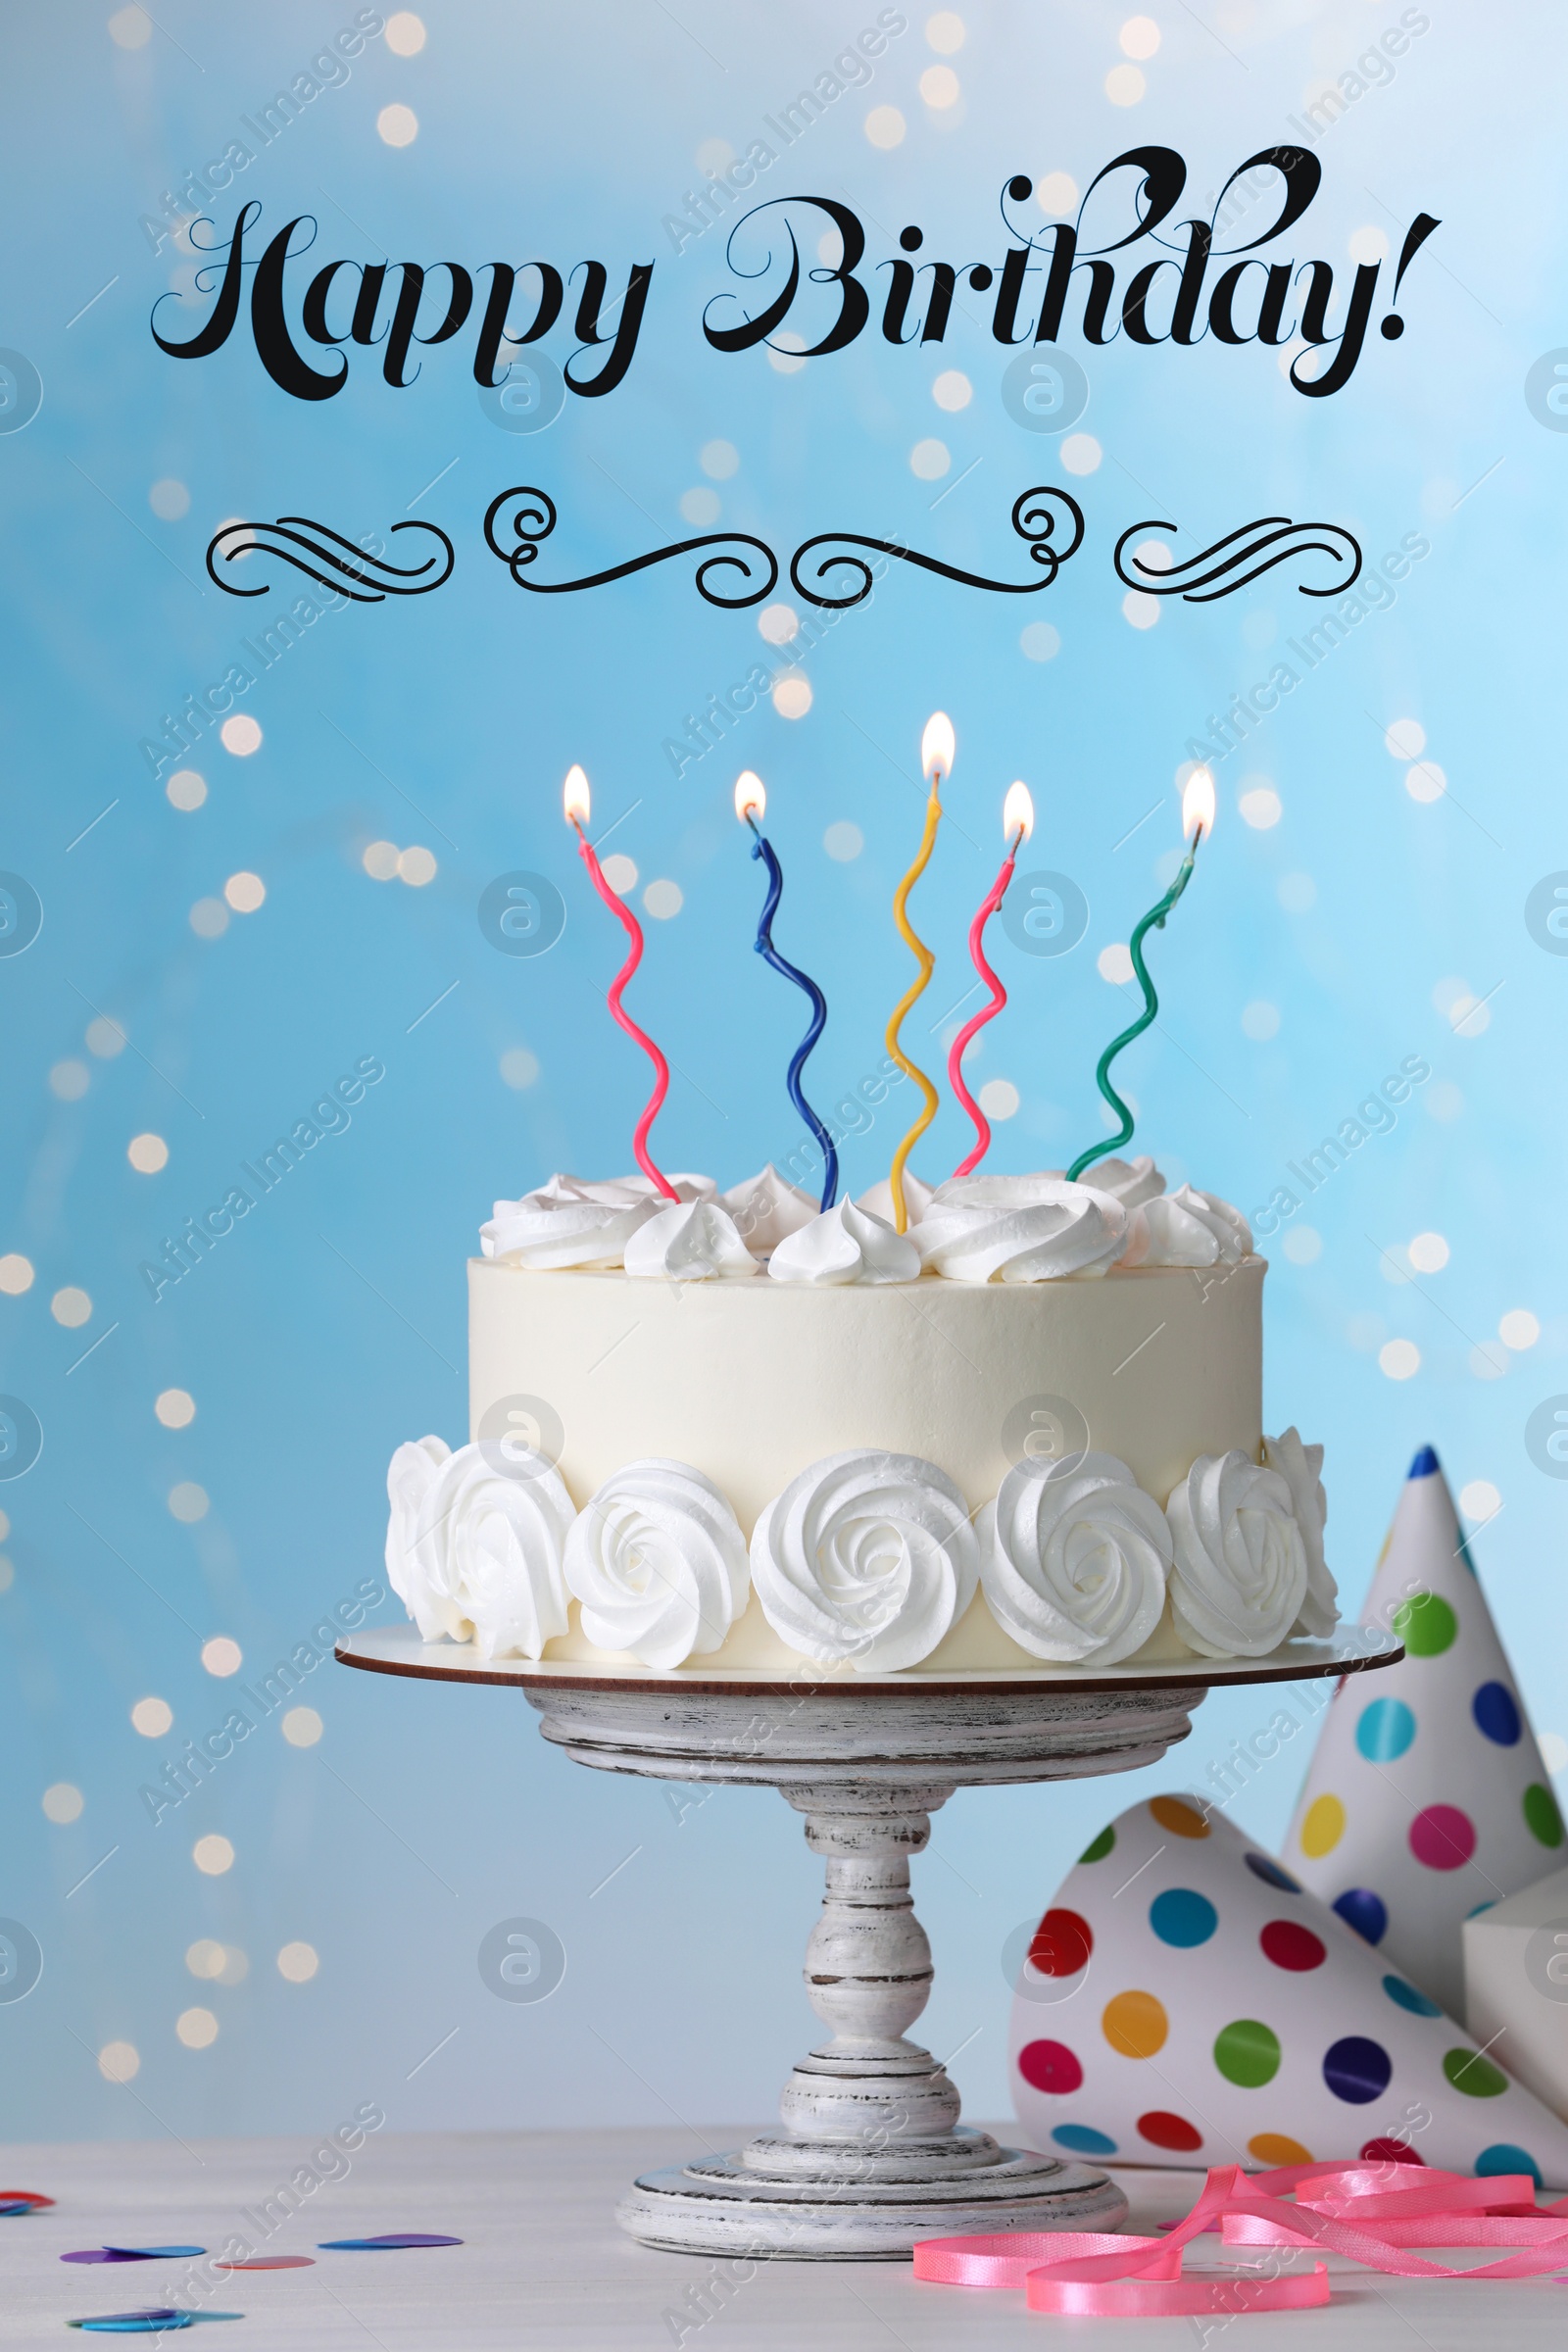 Image of Happy Birthday! Delicious cake with burning candles and decor on white table 